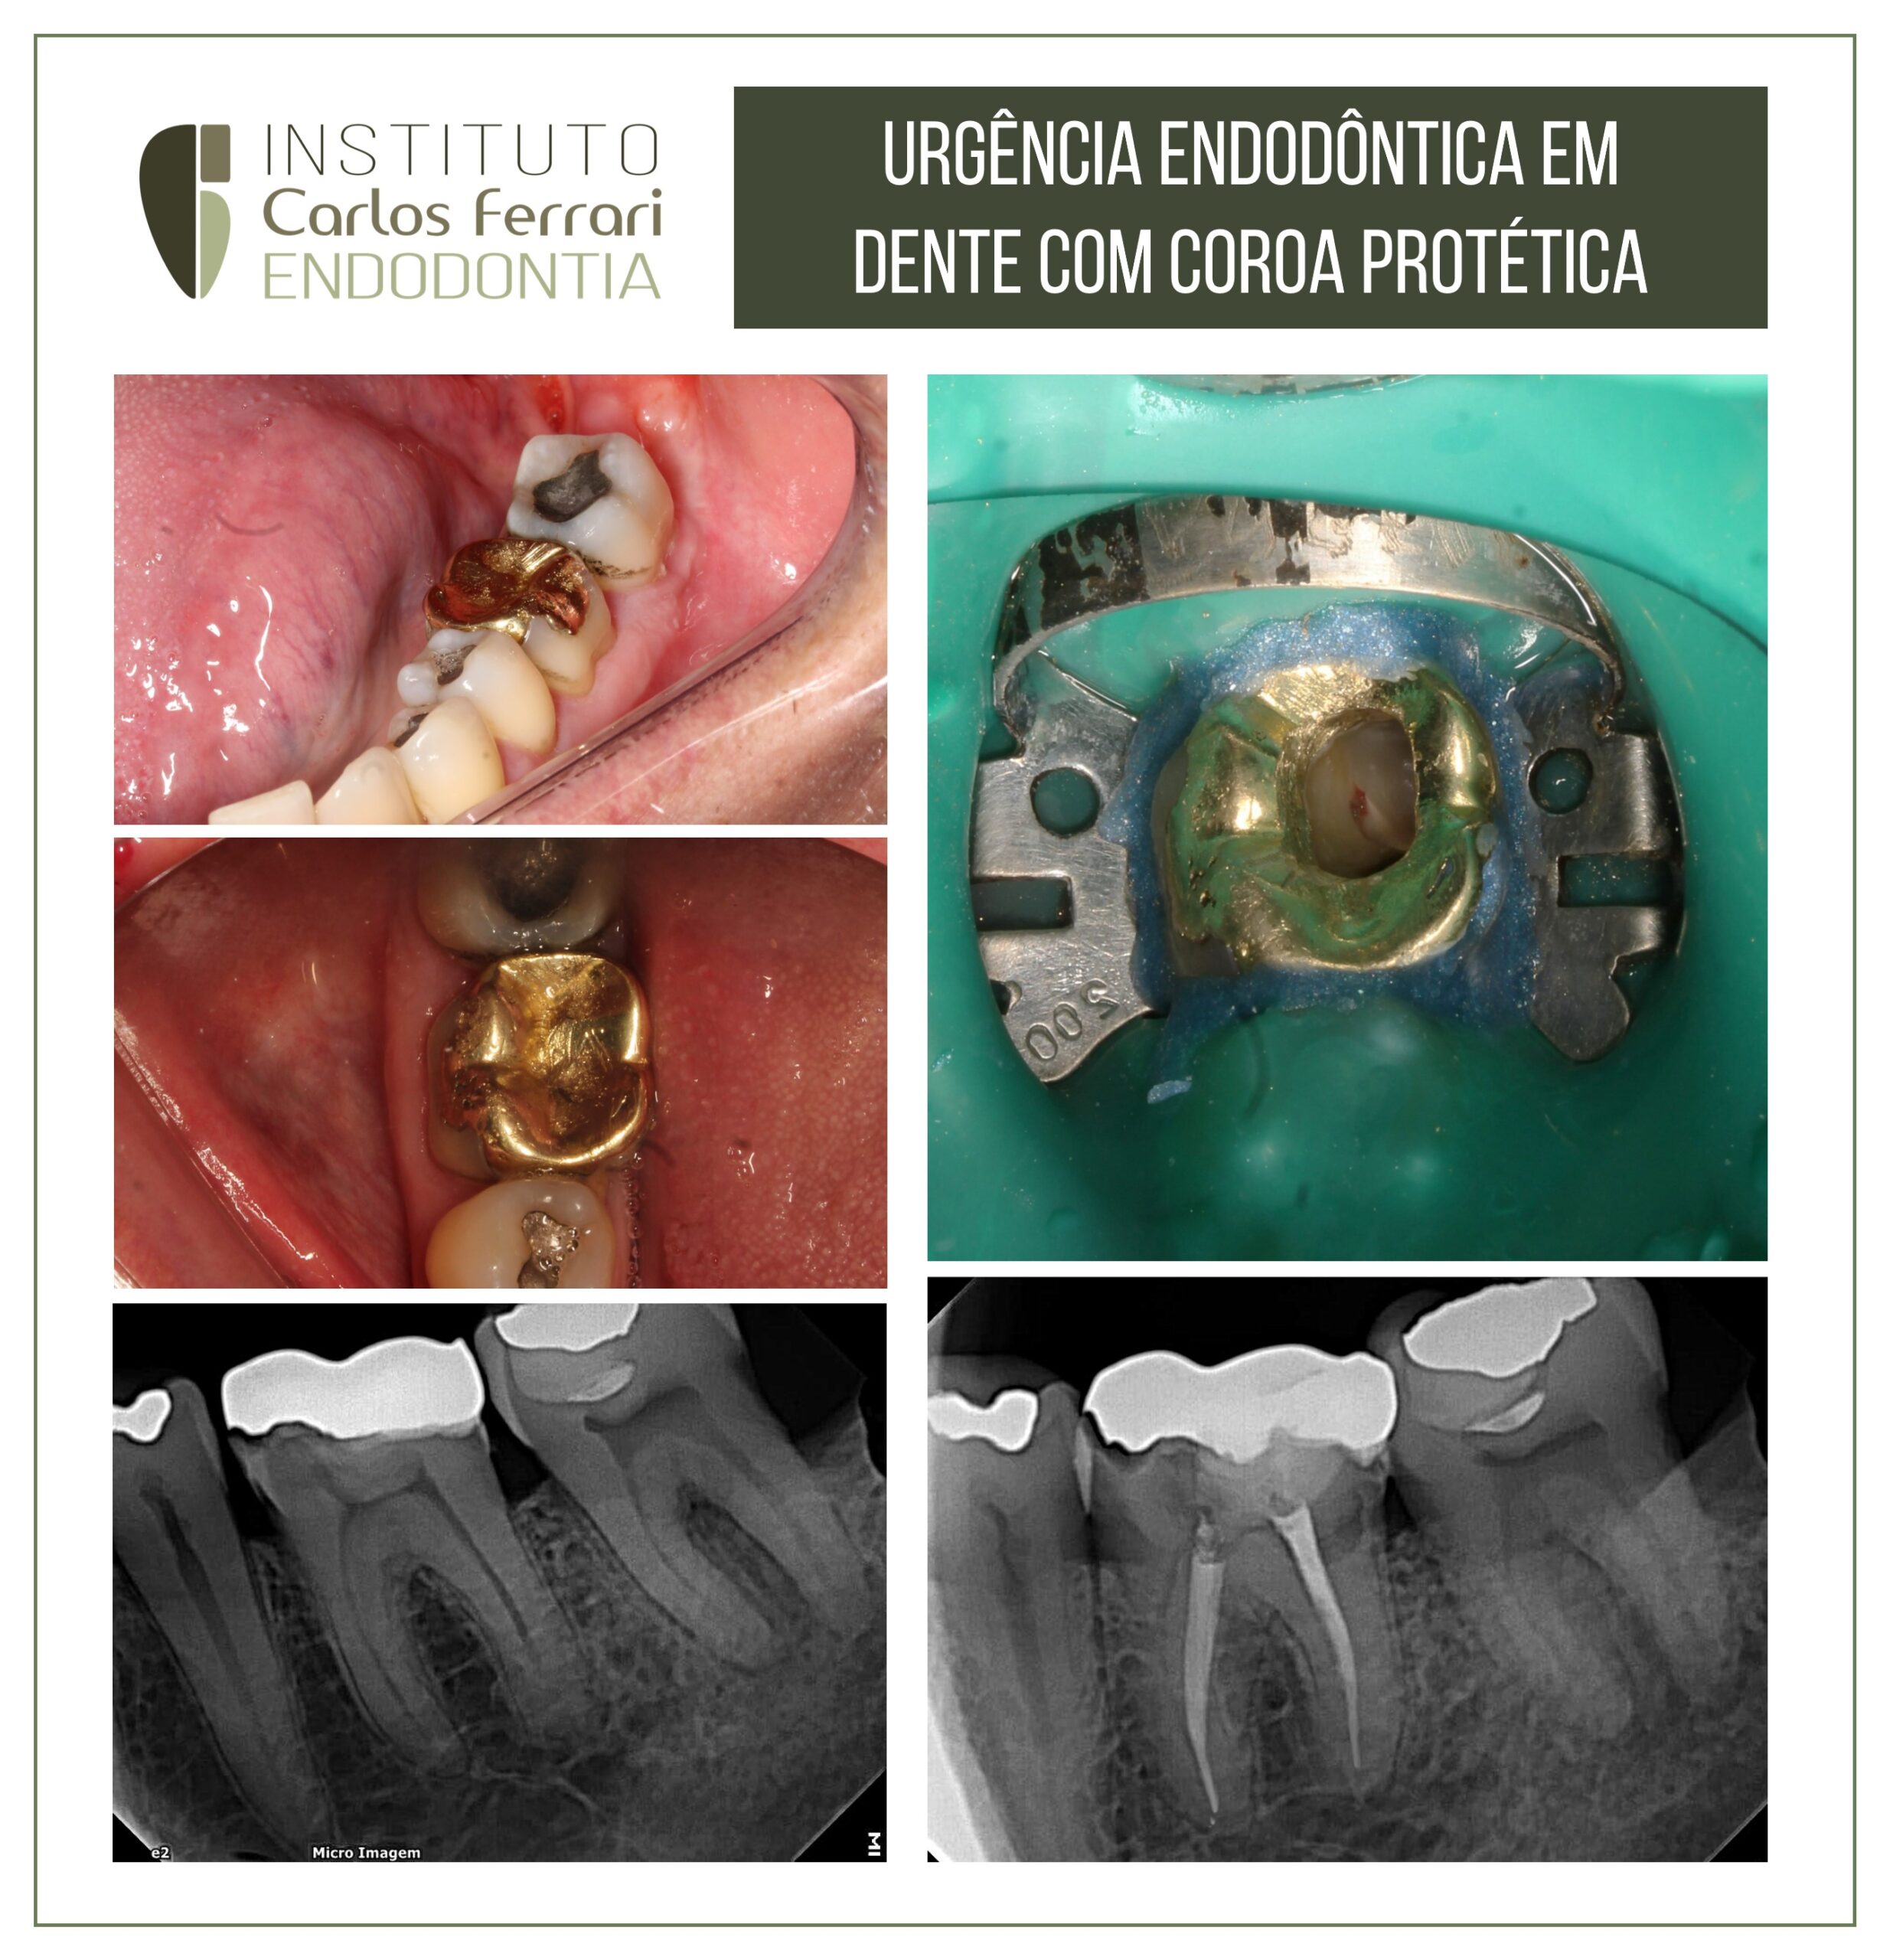 You are currently viewing Endodontic urgency in molar with metal crown.